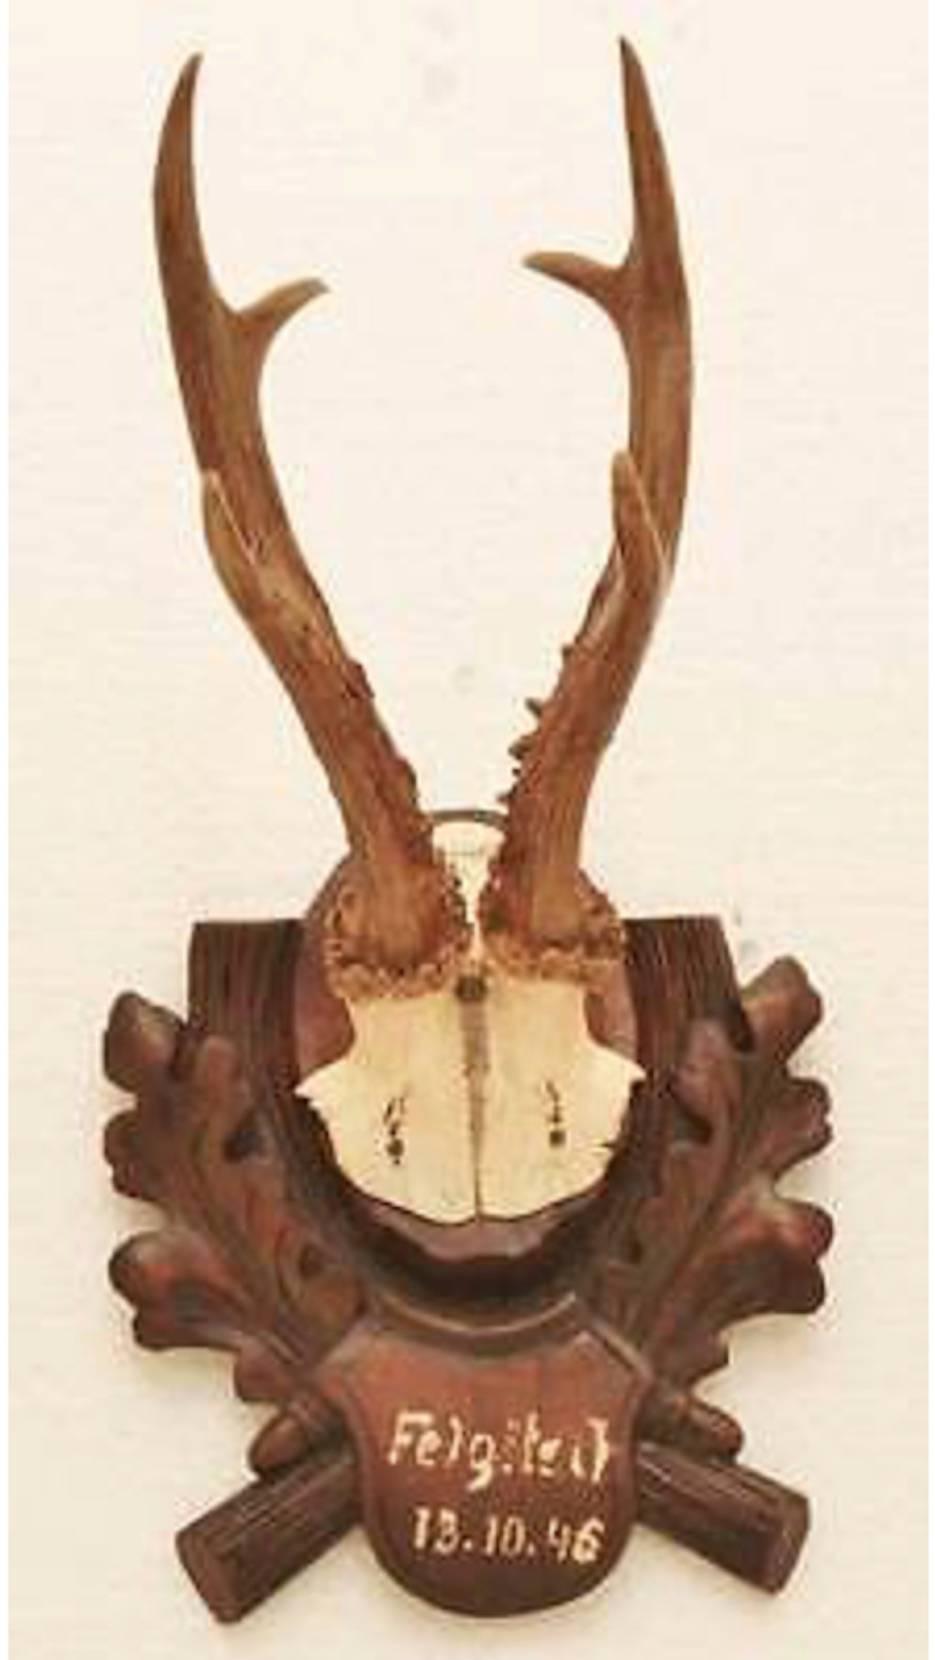 Collection of nine black forest antler mounts on hand-carved wood plaques. Priced per mount.